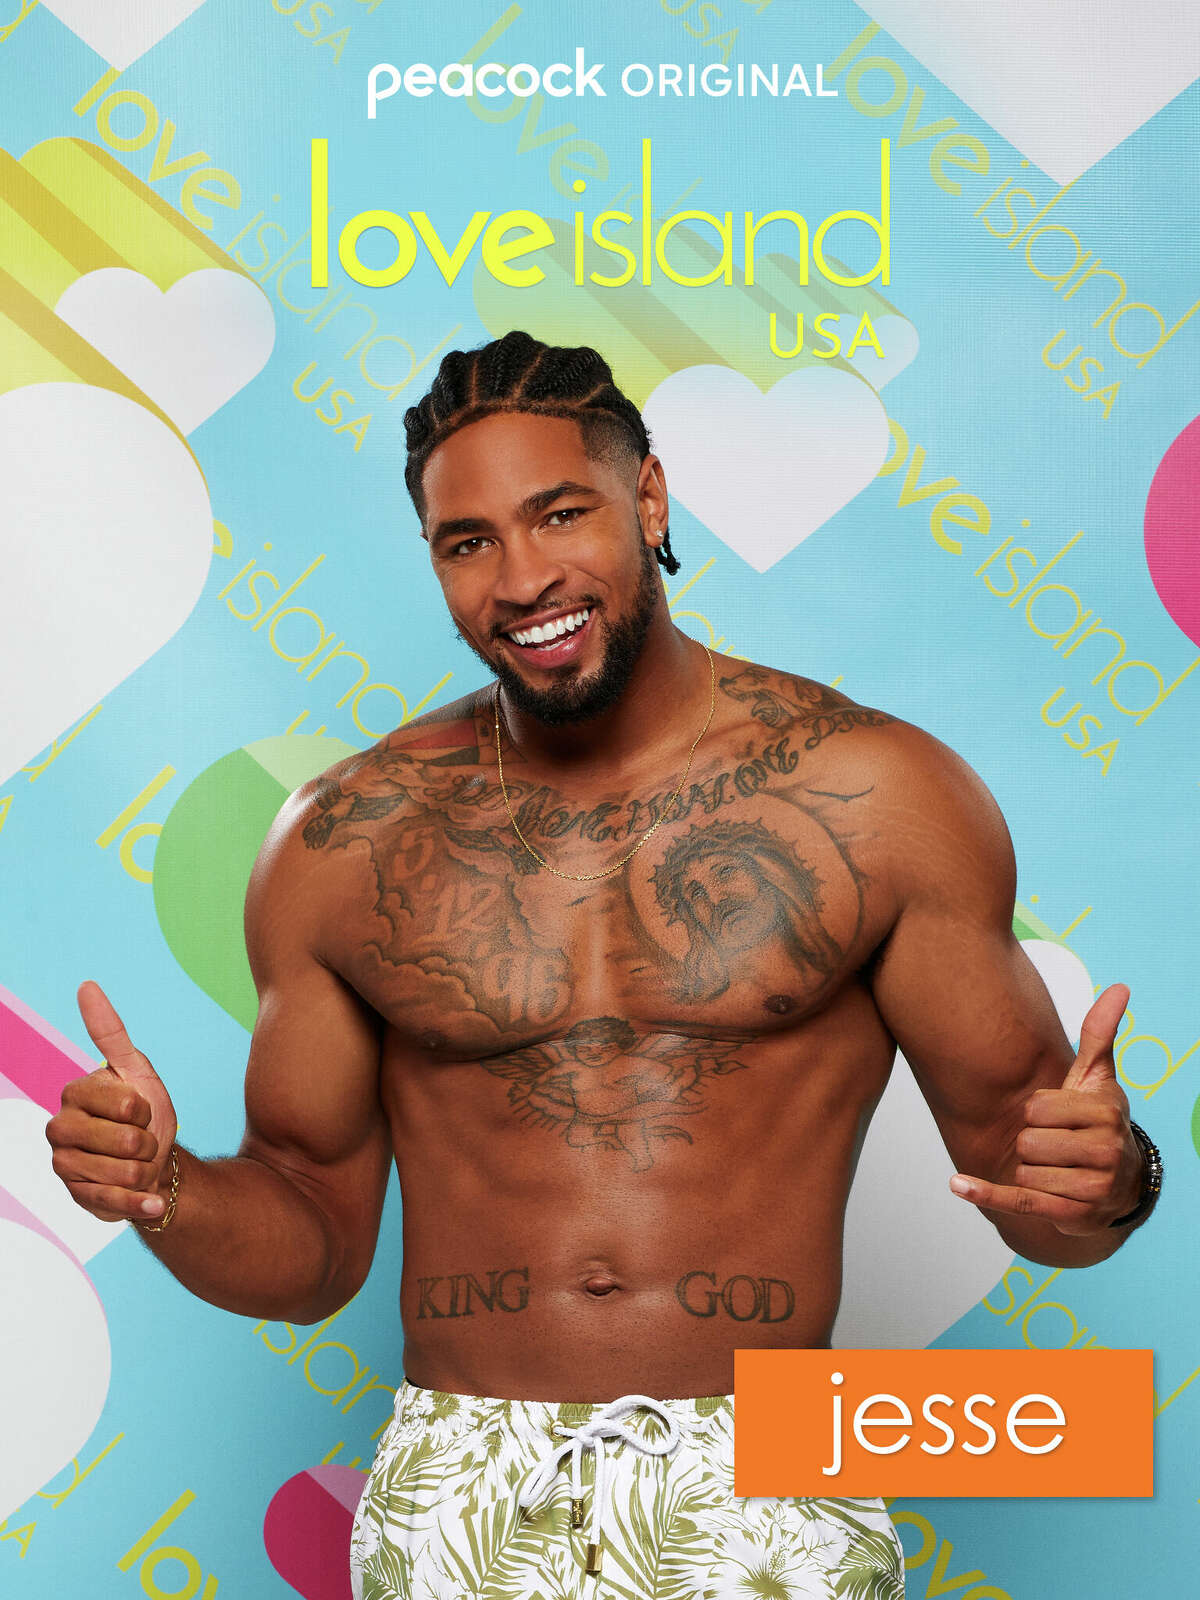 Two Houstonians, Sydney Paight and Jesse Bray, appeared on season four of Love Island USA on Peacock.